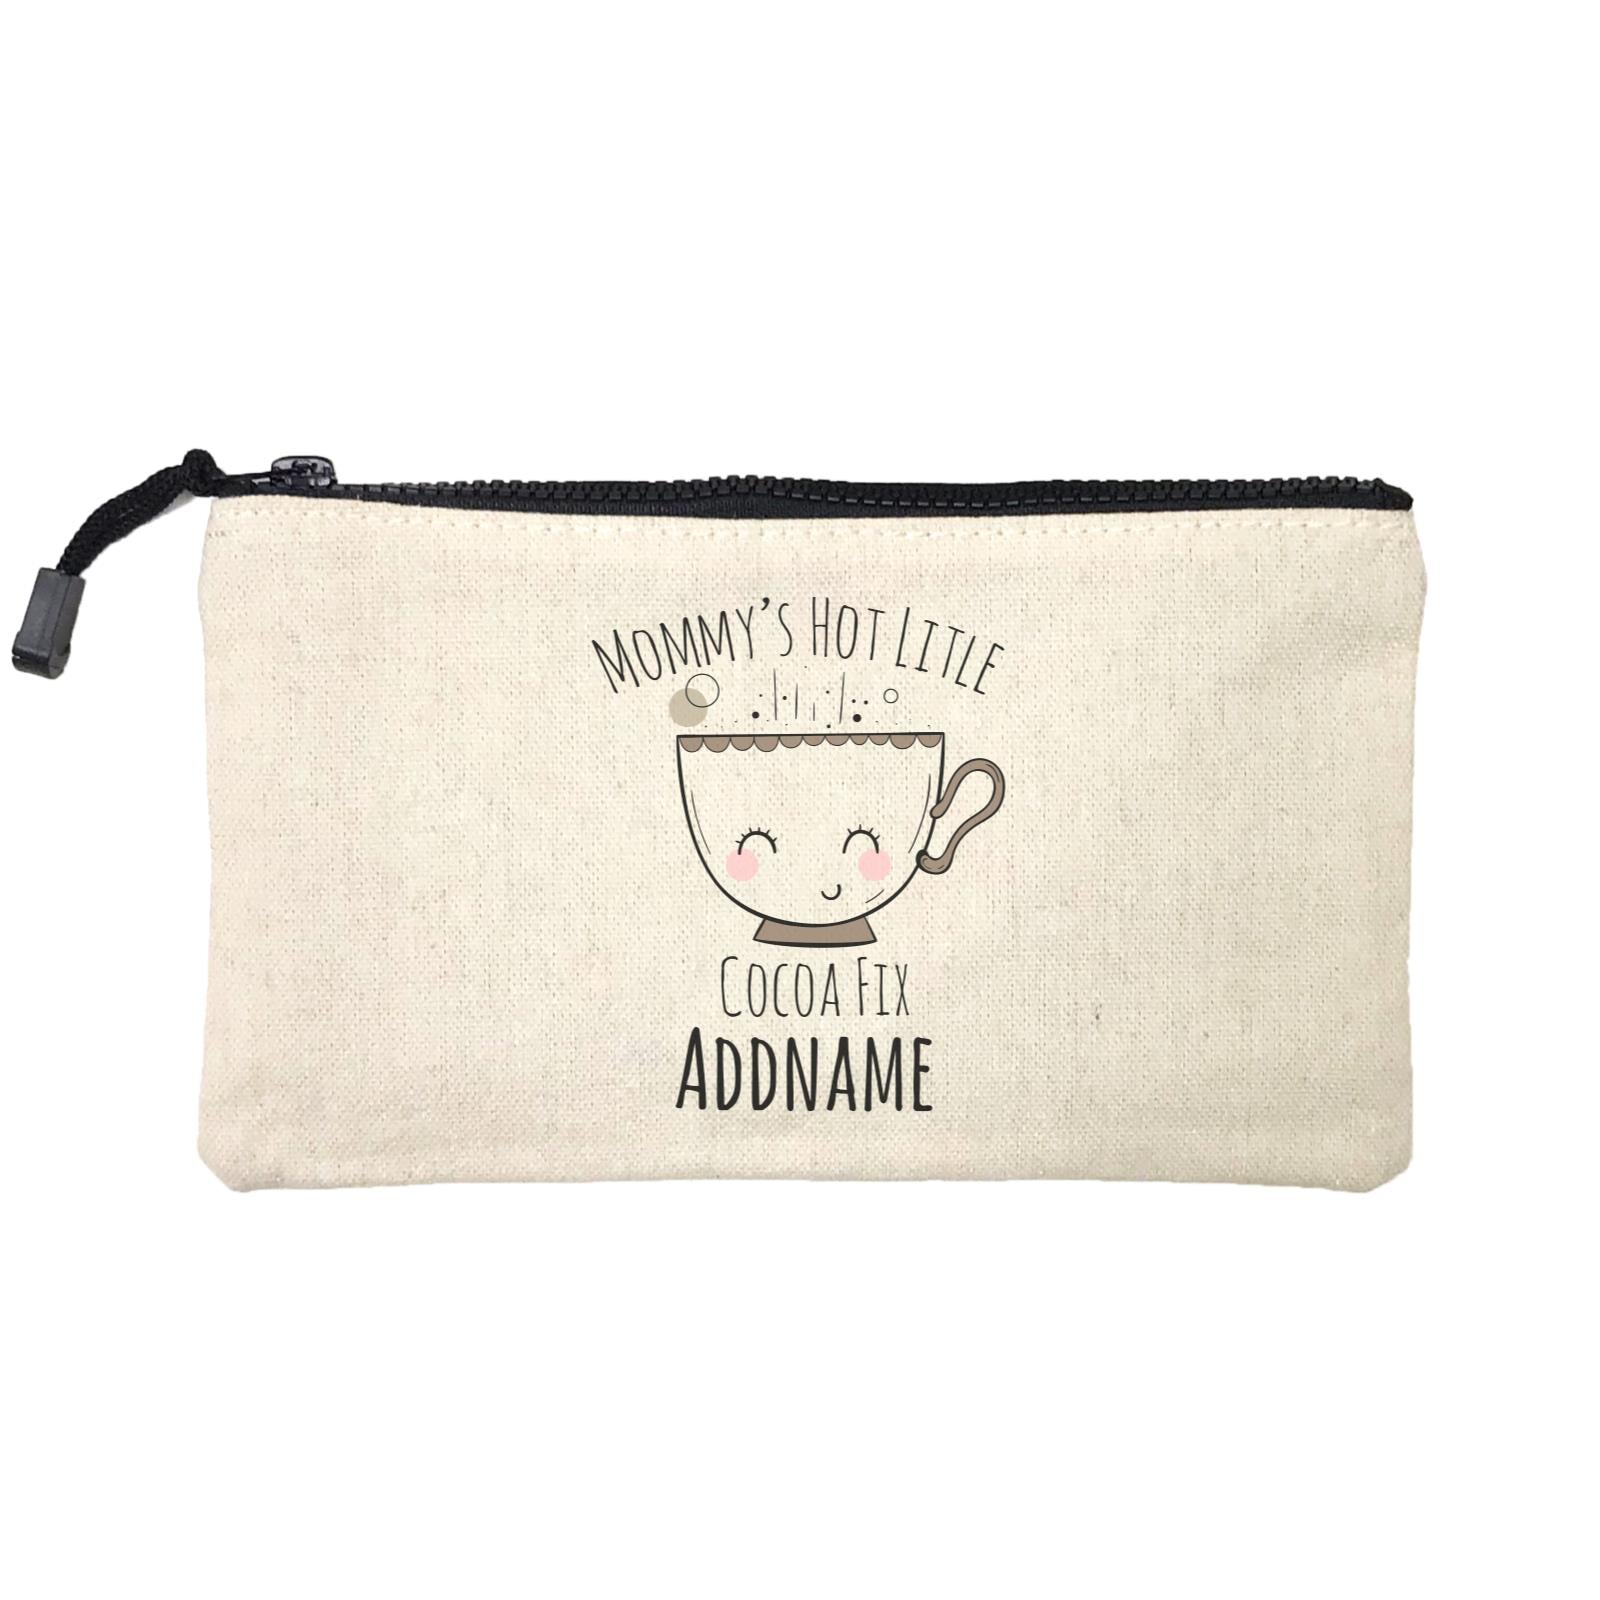 Drawn Sweet Snacks Mommy's Hot Little Cocoa Fix Addname Mini Accessories Stationery Pouch